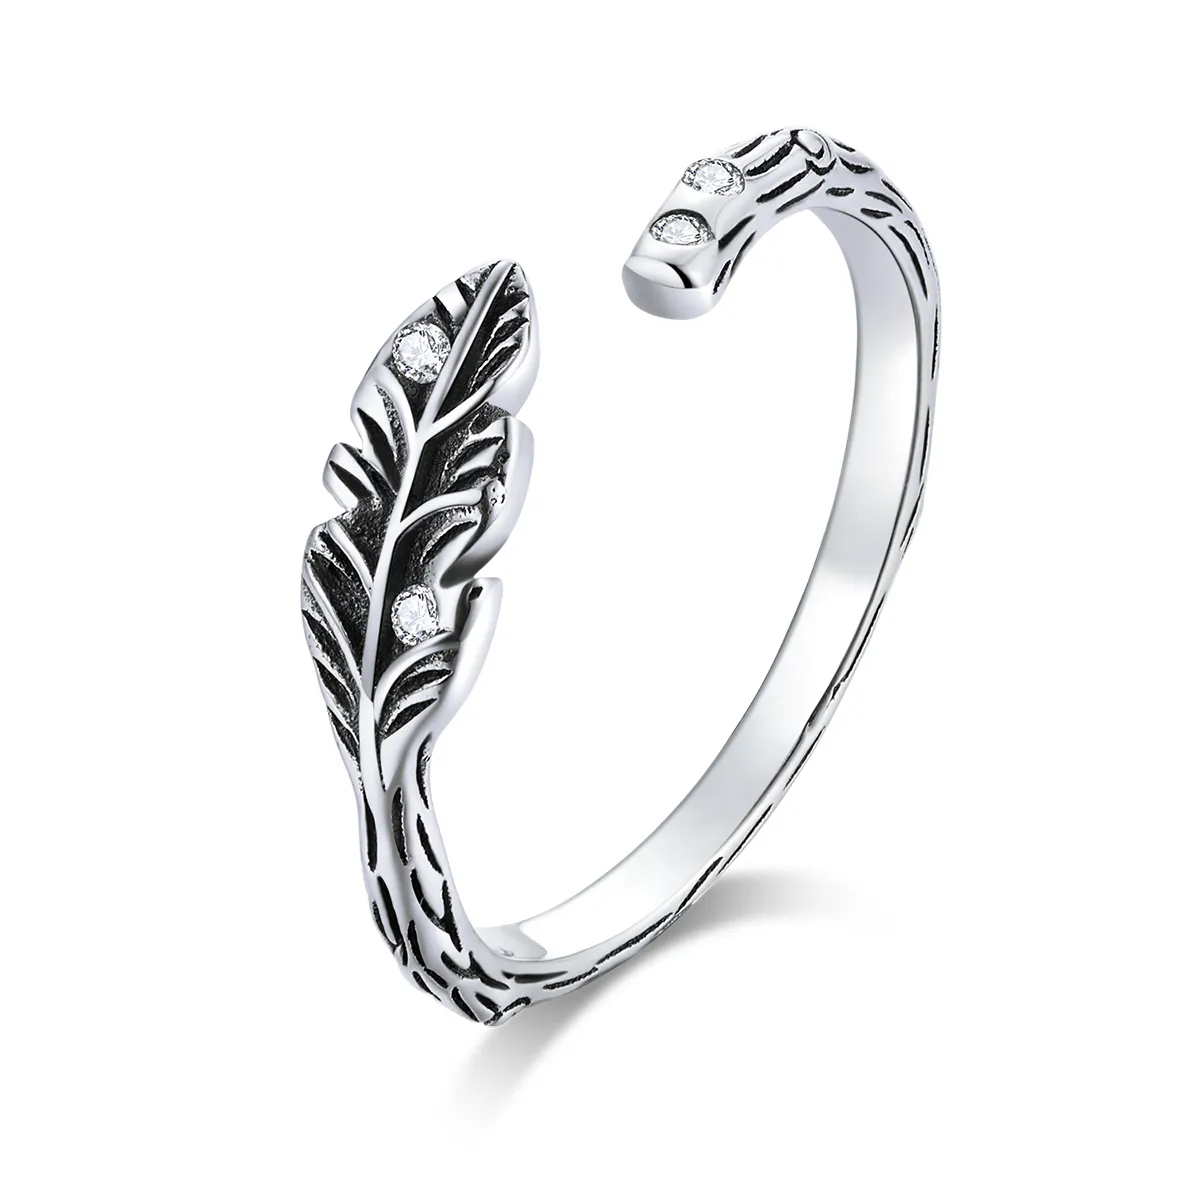 Pandora Style Silver Vintage Leaves Open Ring - SCR639